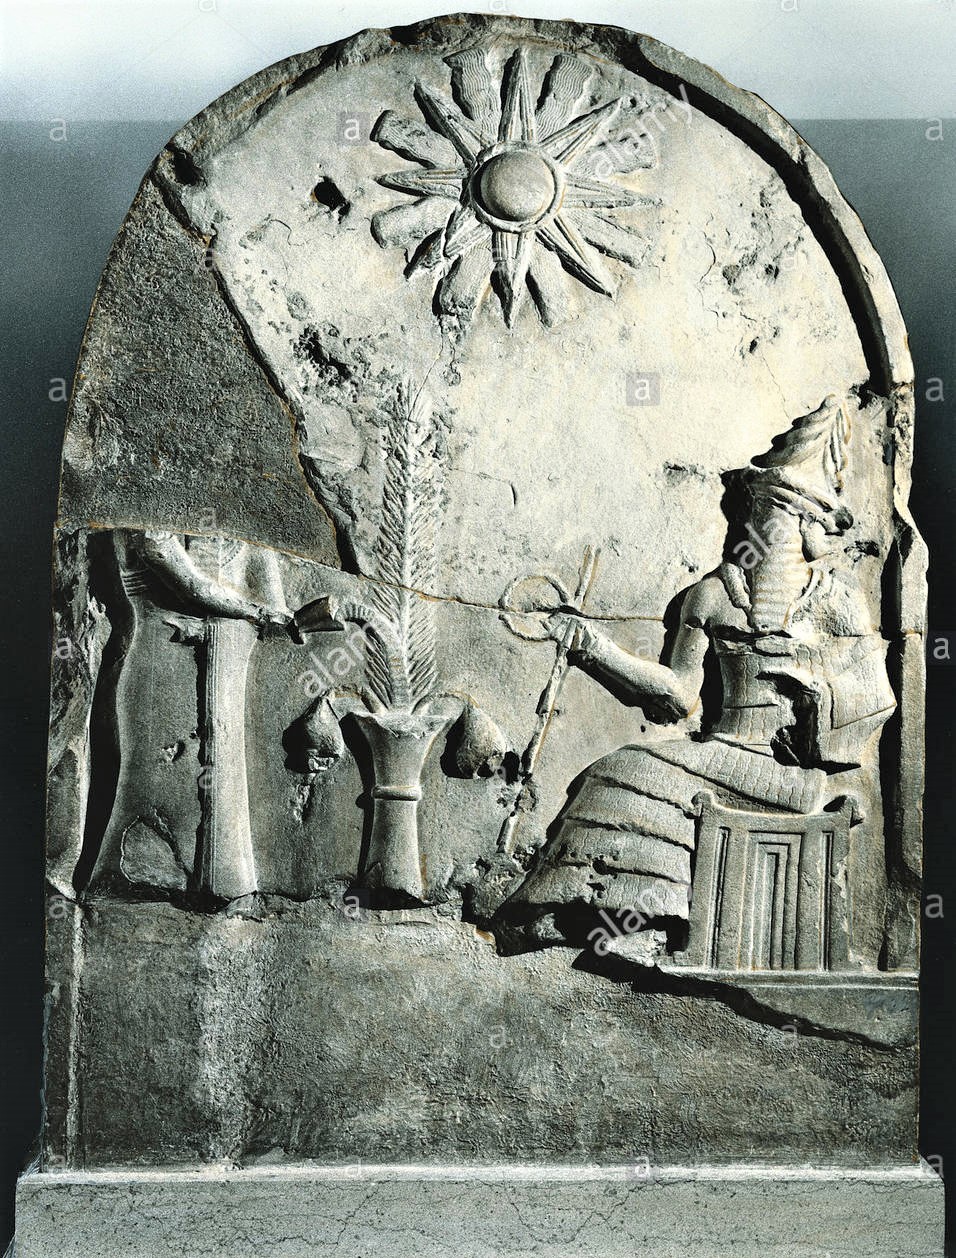 1f - damaged semi-divine king receives his instructions from Utu the Sun god seated in front of him; a time long forgotten when the gods walked & talked with the semi-divines; ancient artifact in the Louvre museum, Paris